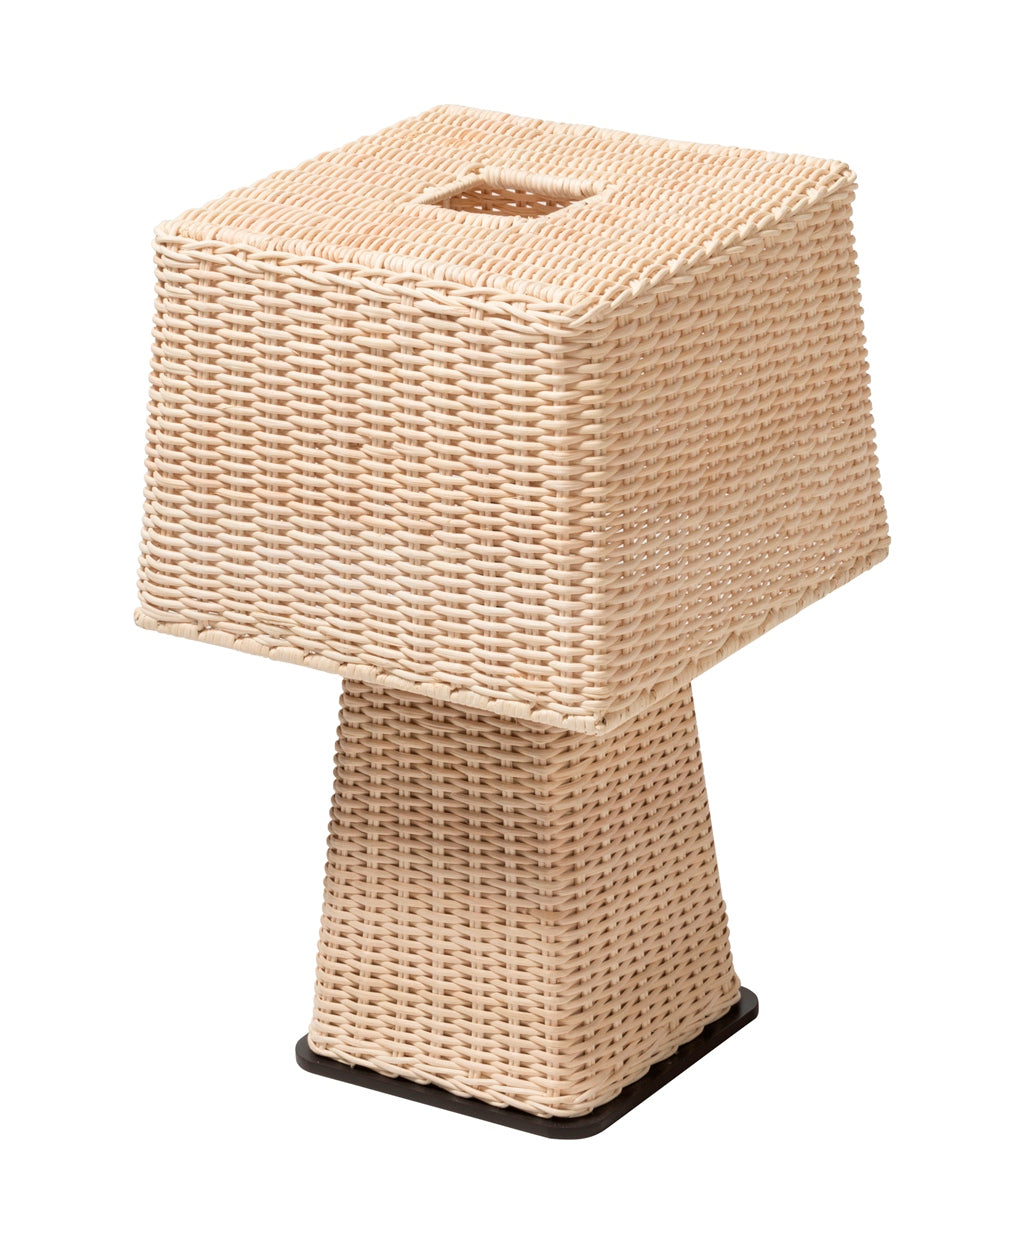 Giobagnara x Stéphane Parmentier Eolie Table Lamp | Meticulously Handmade Woven Rattan | Effortlessly Elegant Design with Pure Forms and Proportions | Rattan Features Warm Natural Nuances and Captivating Light and Dark Effects | Metal Base Provides Subtle Contrast and Texture | Harmonious Combination of Materials for Timeless Appeal